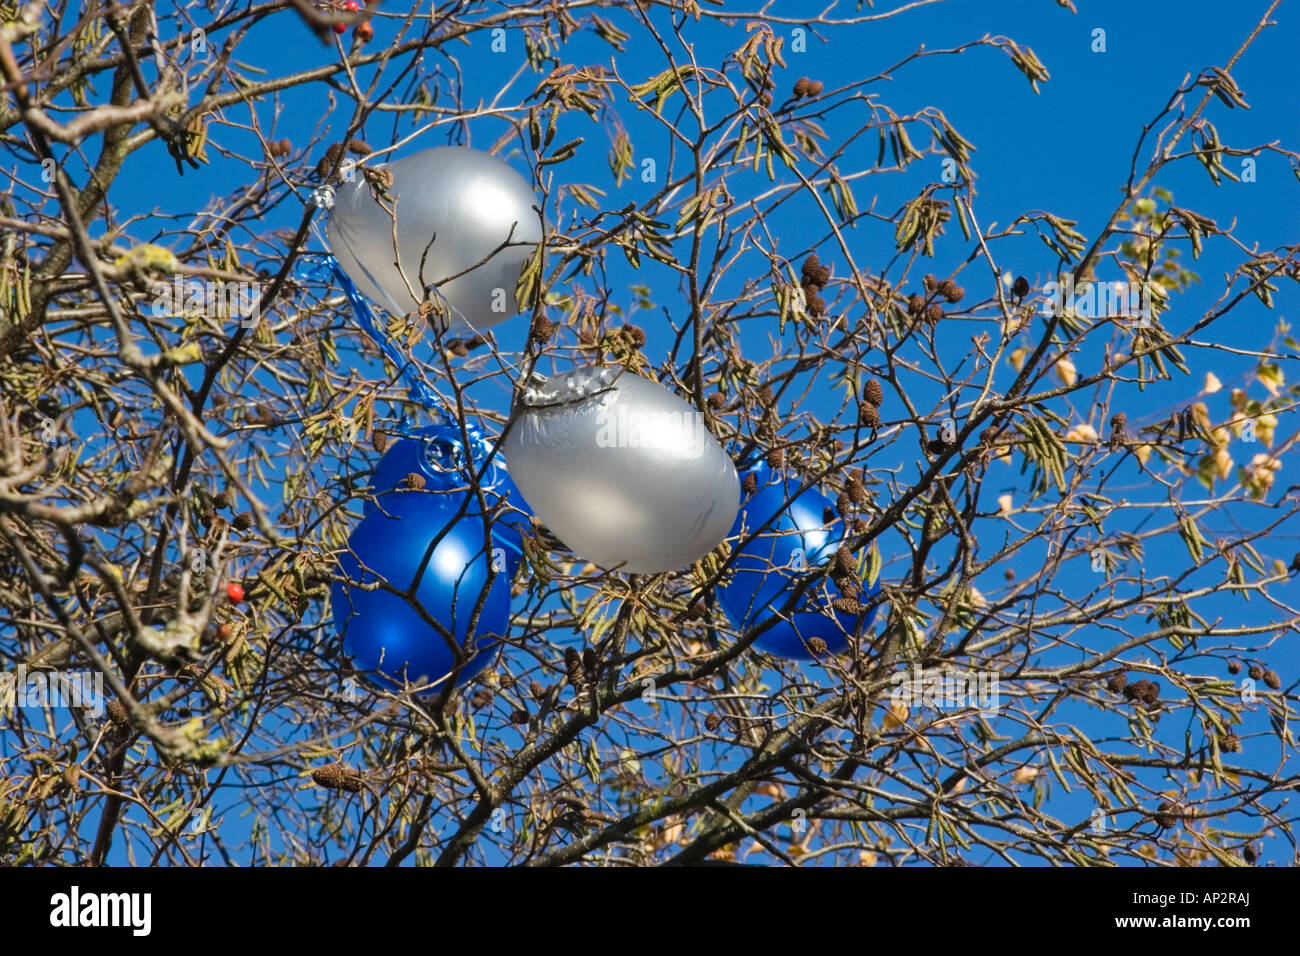 Helium balloons trapped and tangled in tree branches Stock Photo